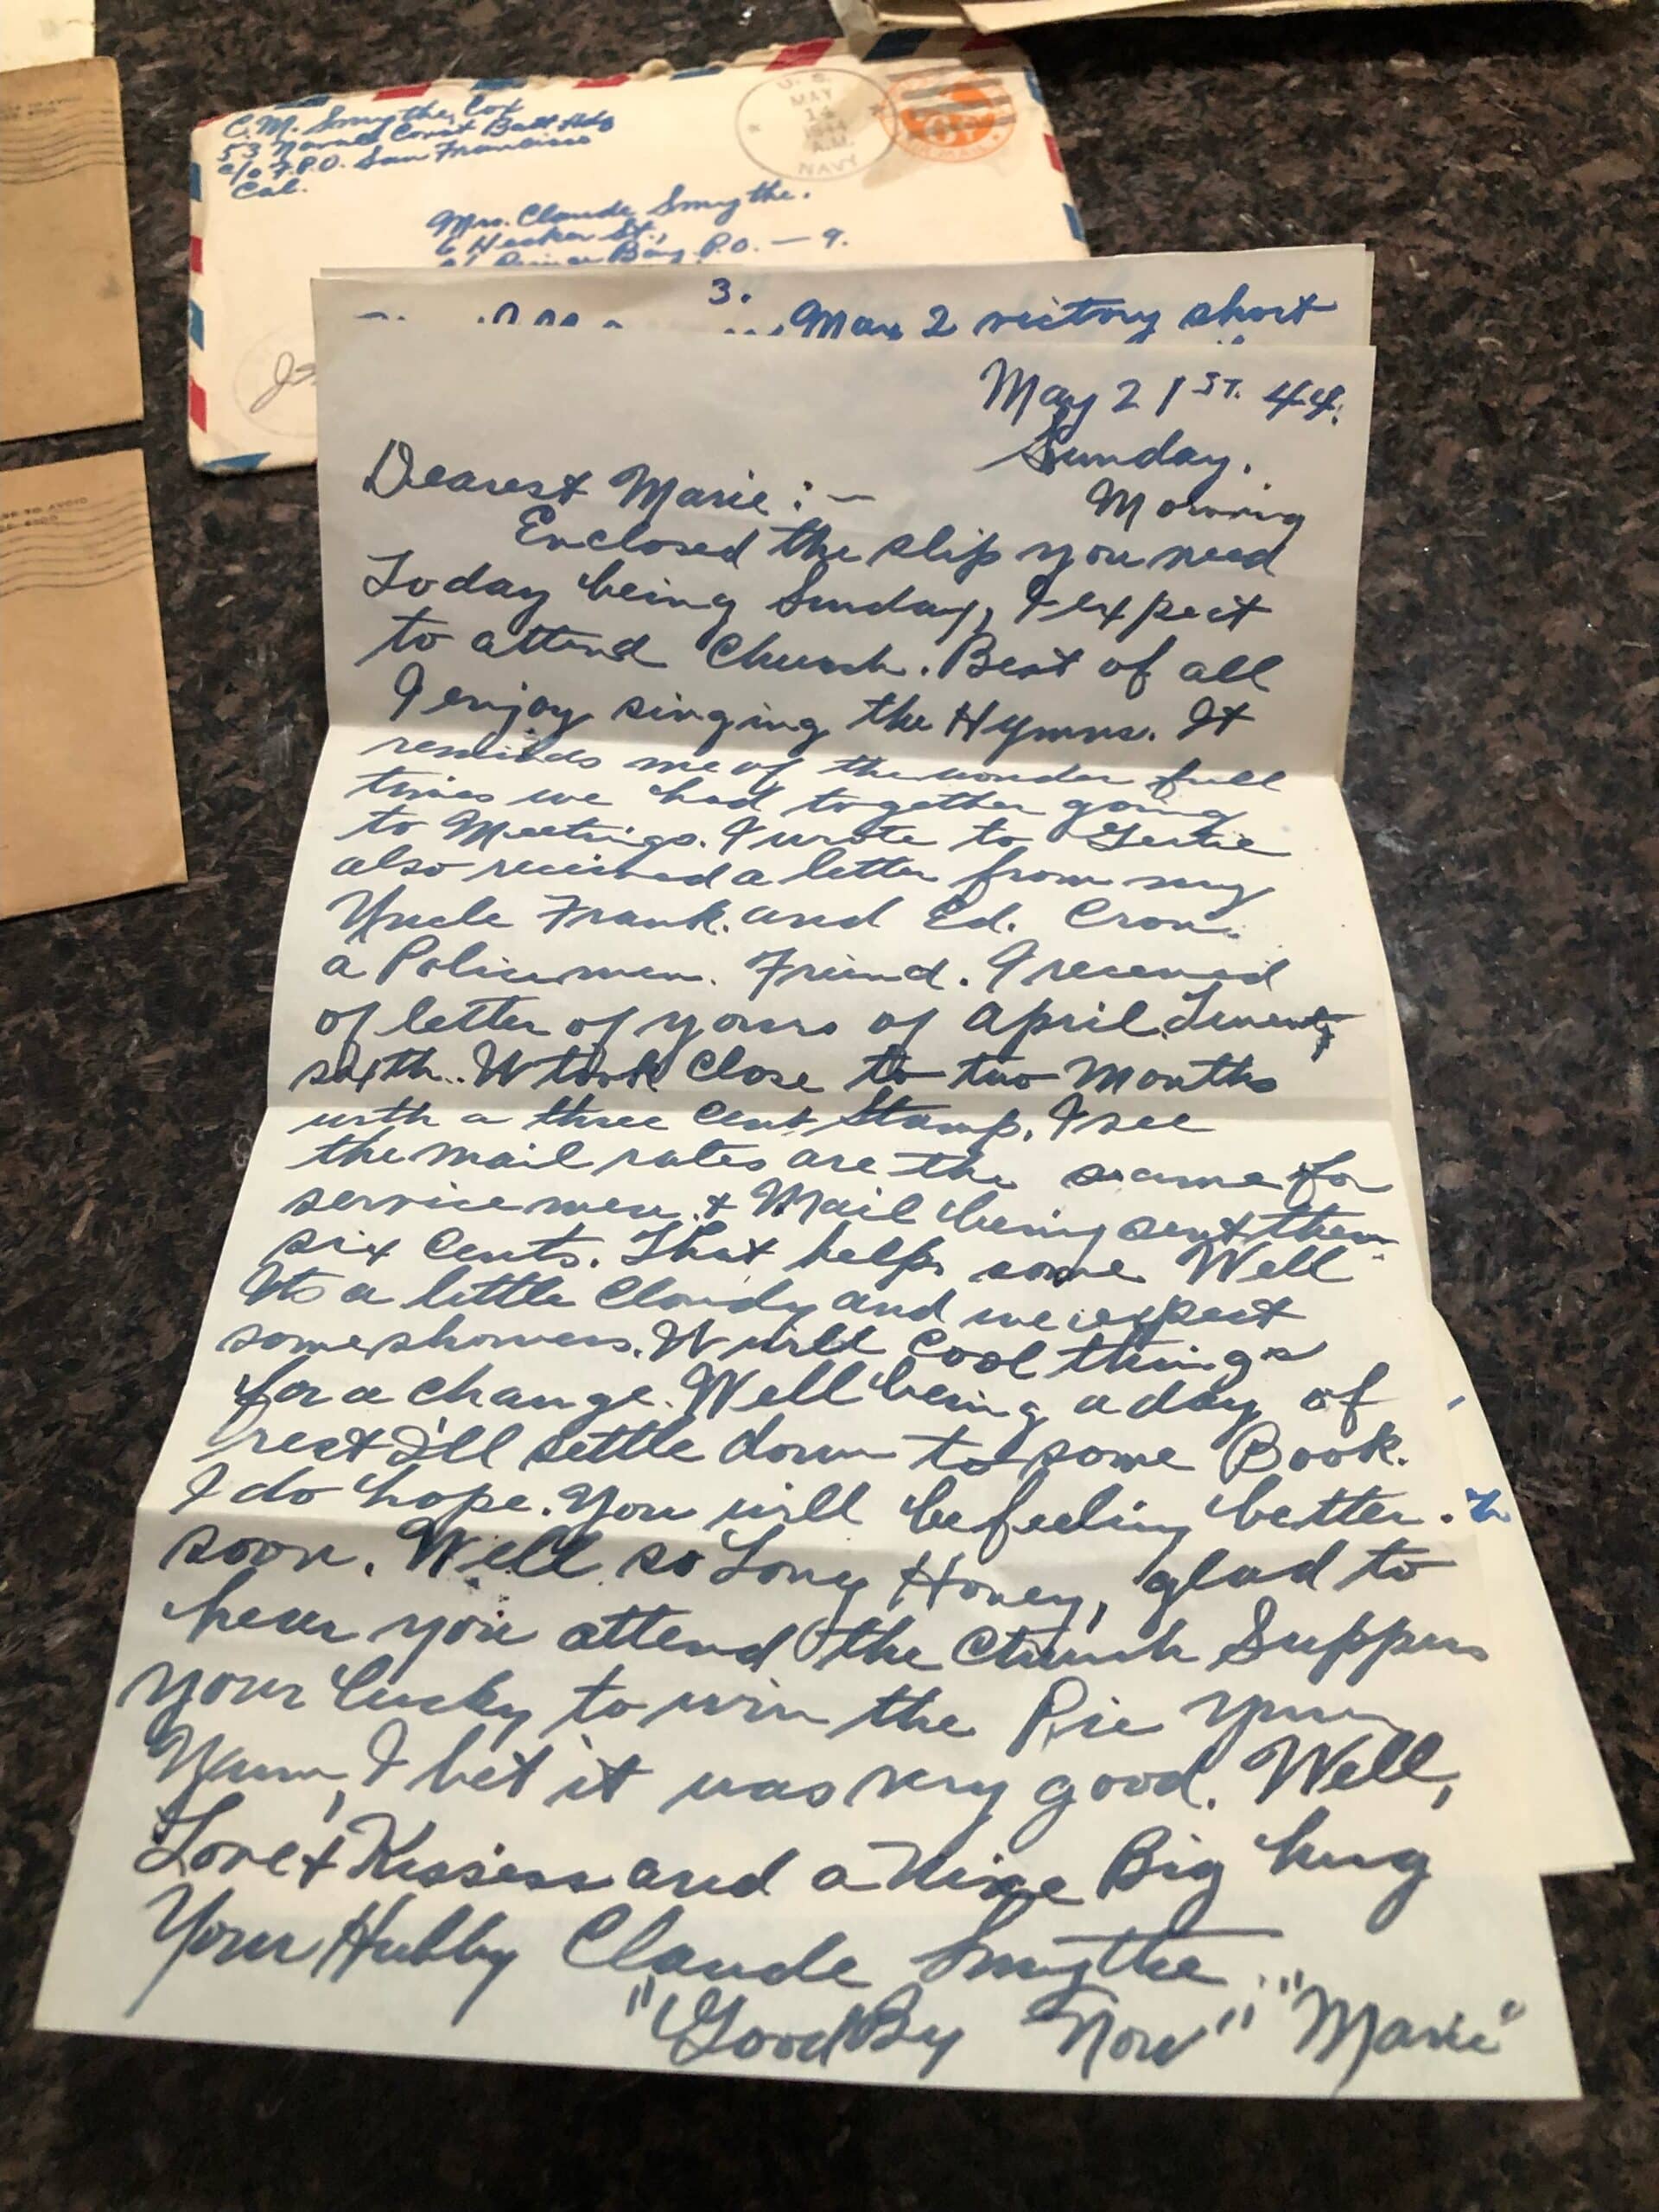 A photo of one of the letters, dated May 21, 1944